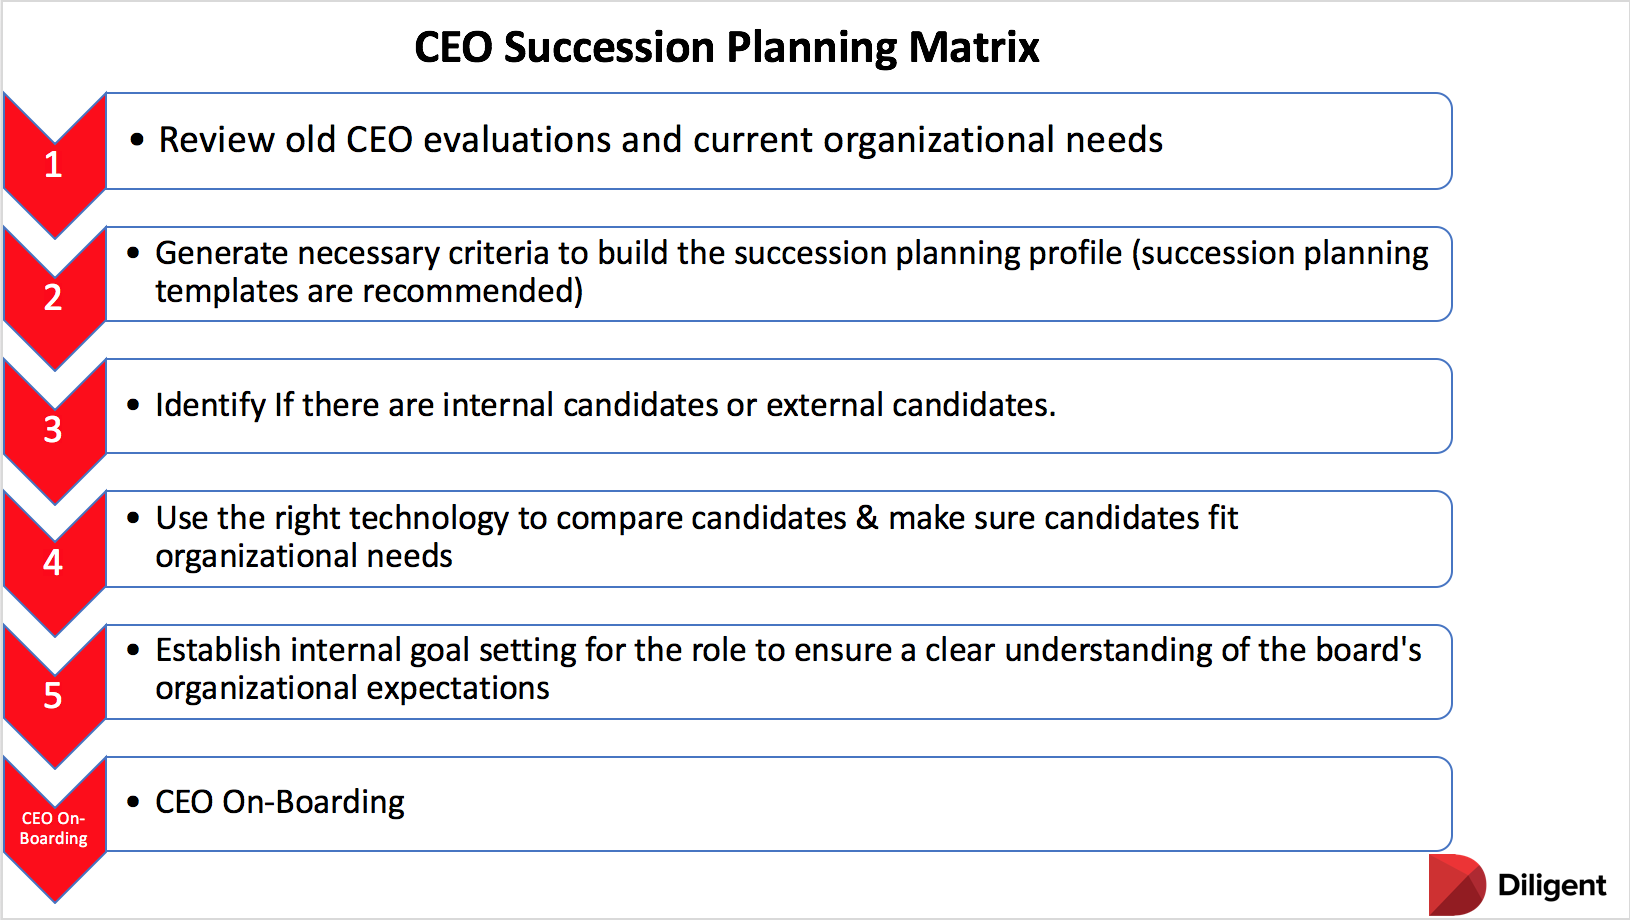 Having a proper CEO succession planning process will better allow you to templatize your succession planning.